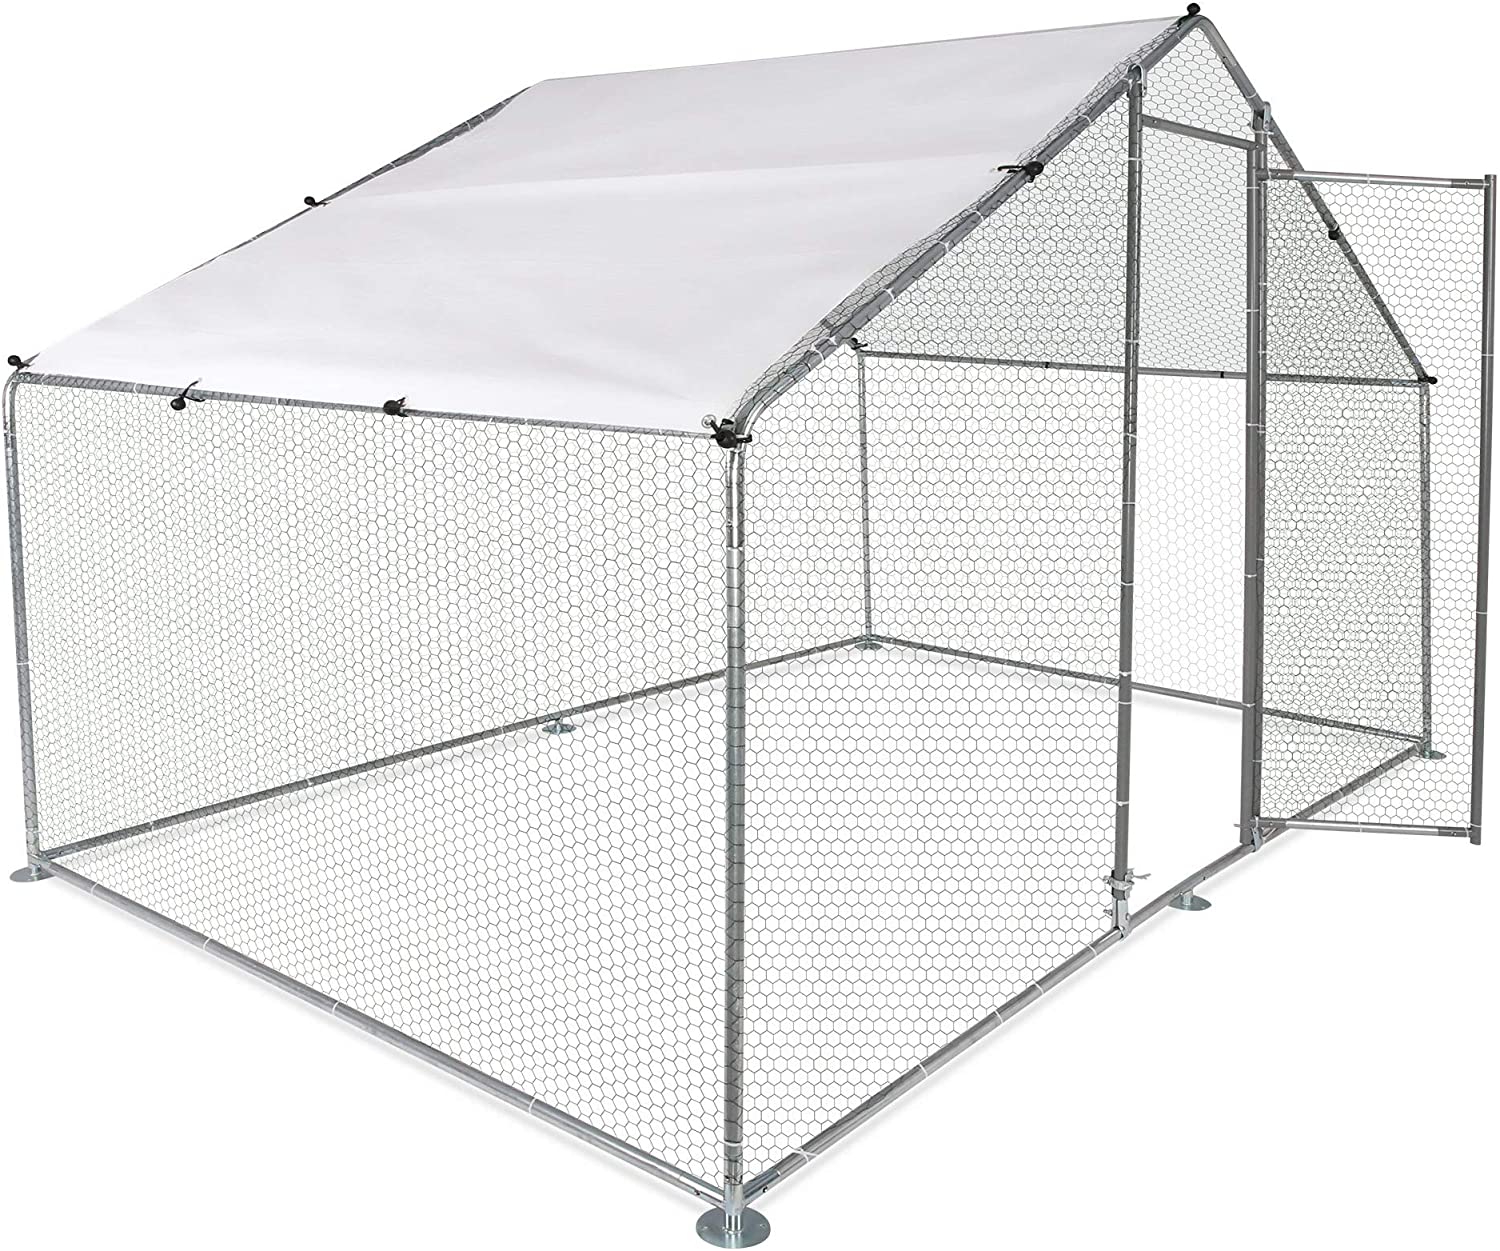 Large Metal Chicken Coop 9.9’L x 6.5’W x 6.5’H Walk-in Chicken Cage Pens Crate Outdoor Rabbit Hen Run House with Waterproof Cover for Backyard Farm